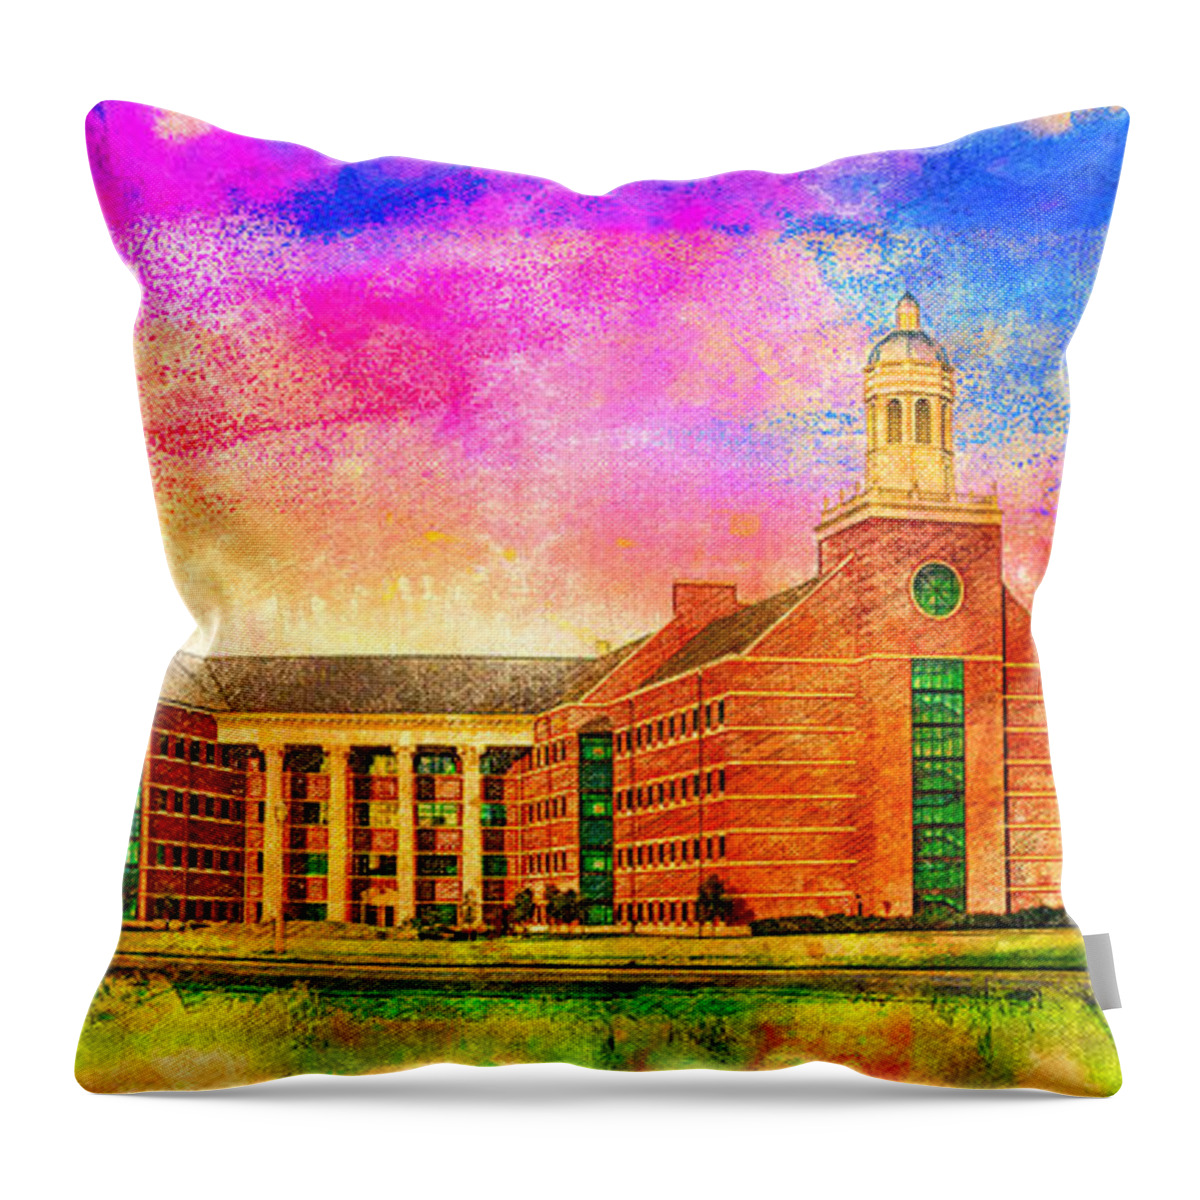 Baylor Science Building Throw Pillow featuring the digital art Baylor Science Building of the Baylor University in Waco, Texas - digital painting by Nicko Prints